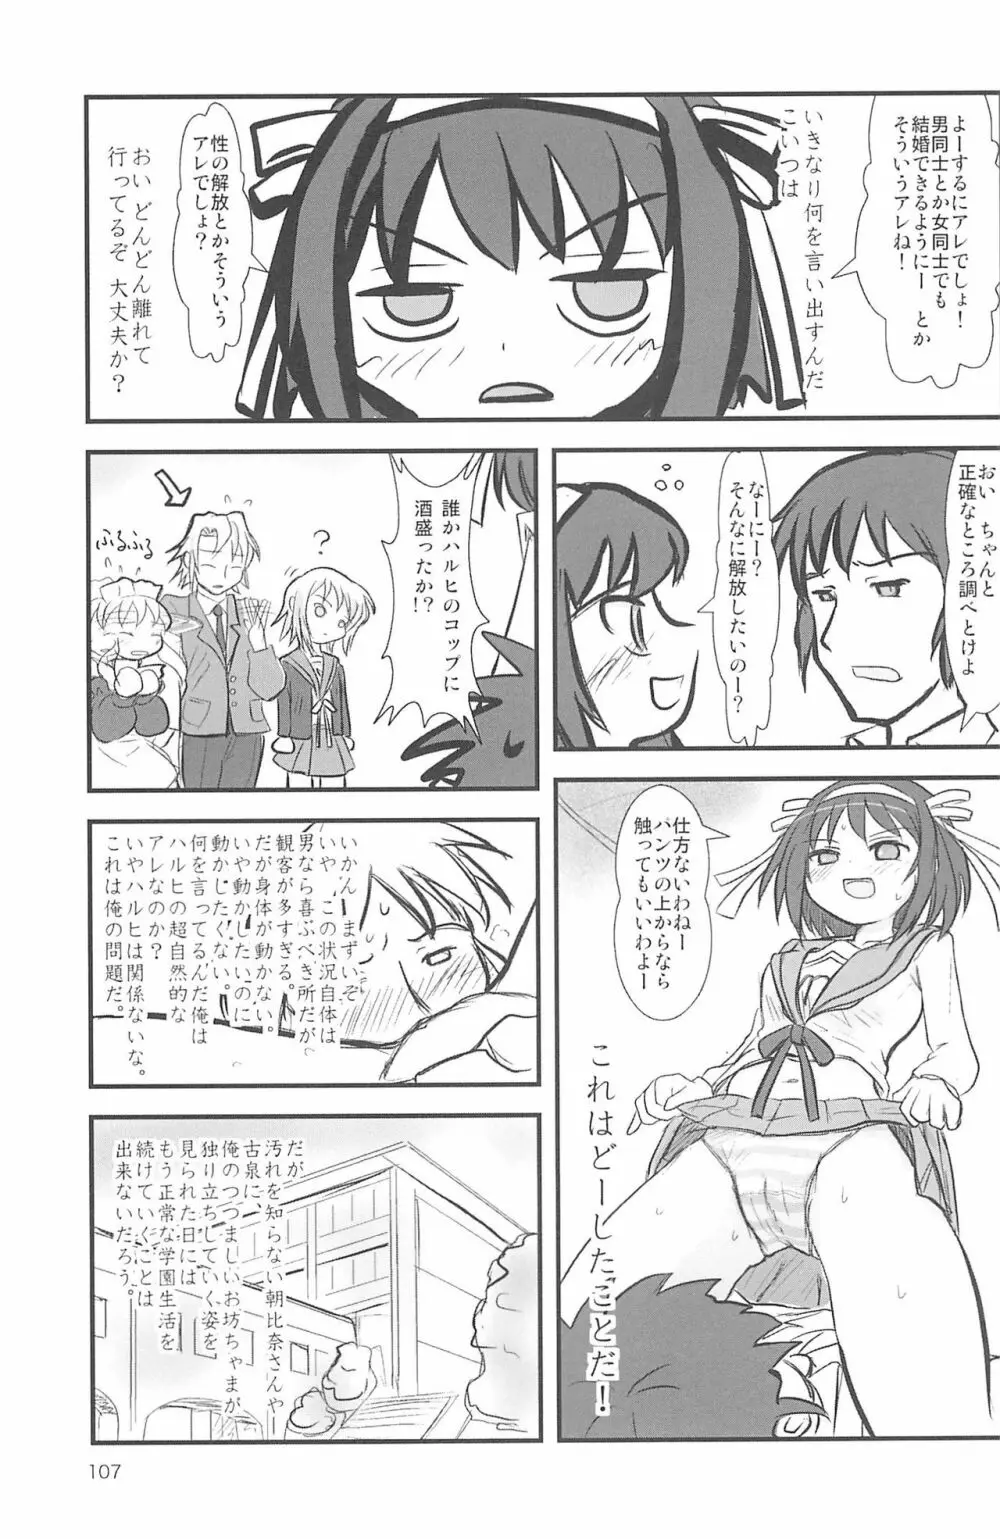 ND-special Volume 5 107ページ